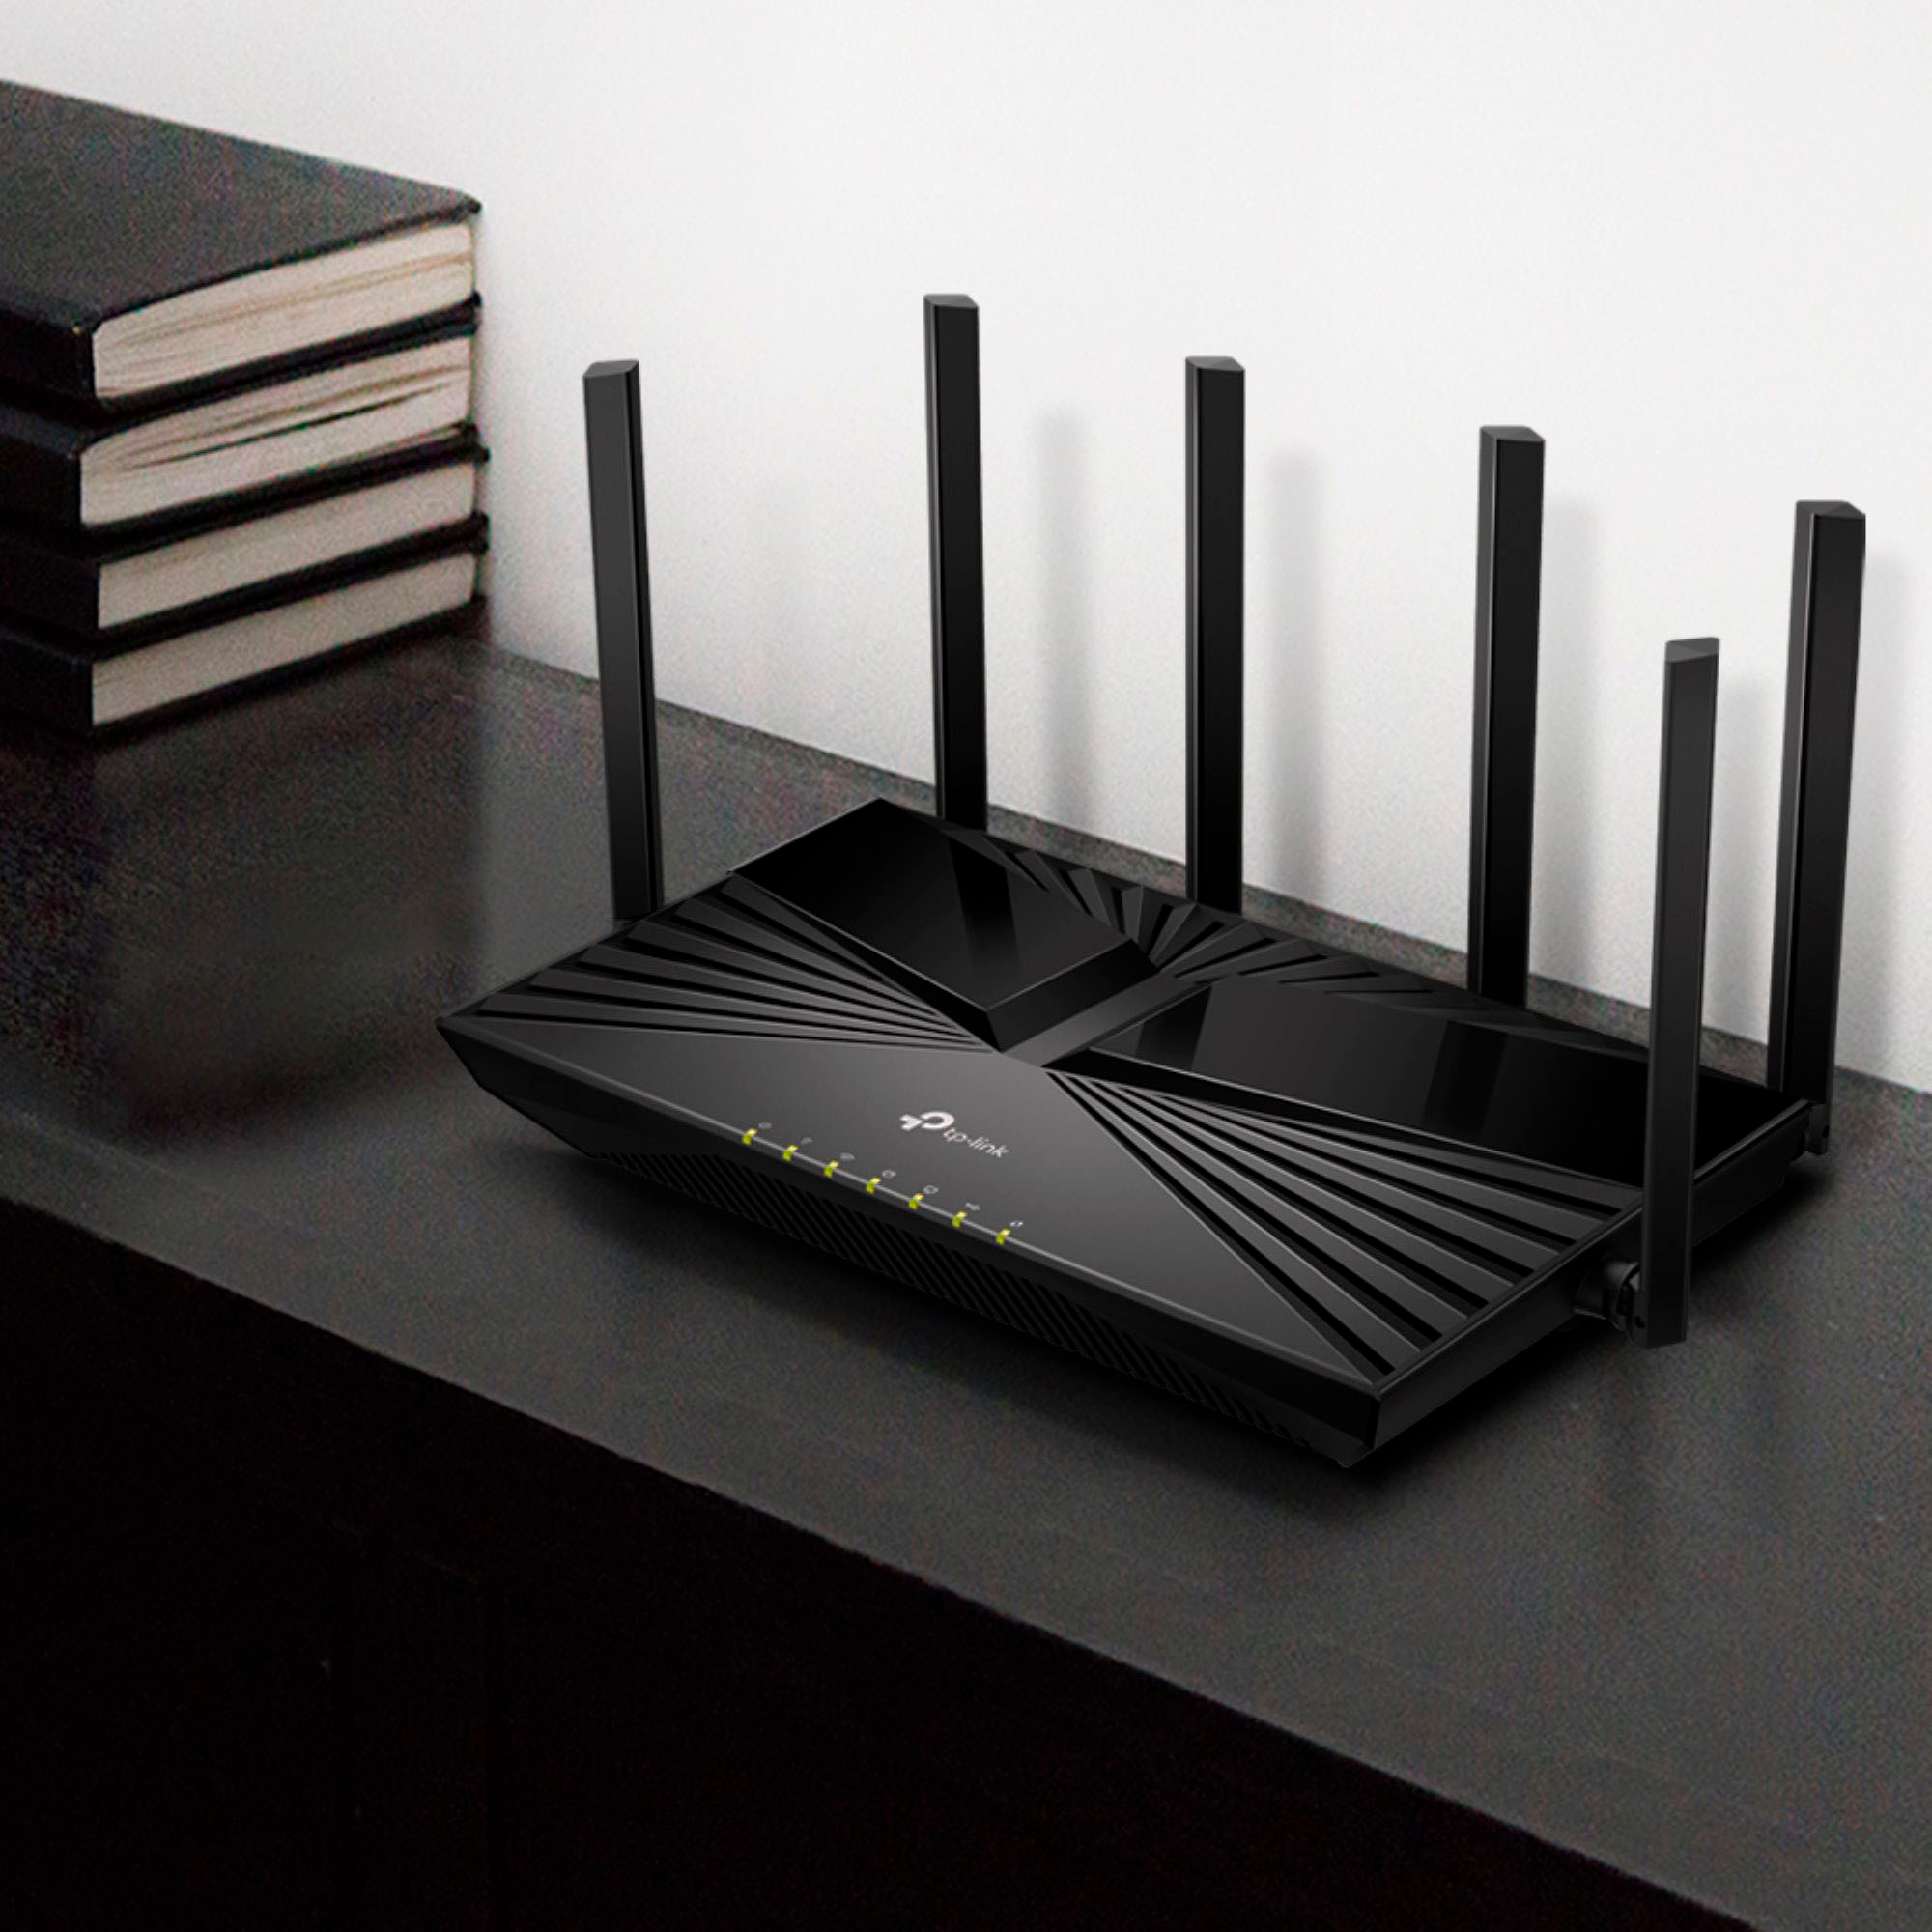 TP-Link AX5400 WiFi 6 Router (Archer AX73)- Dual Band Gigabit Wireless  Internet Router, High-Speed ax Router for Streaming, Long Range Coverage